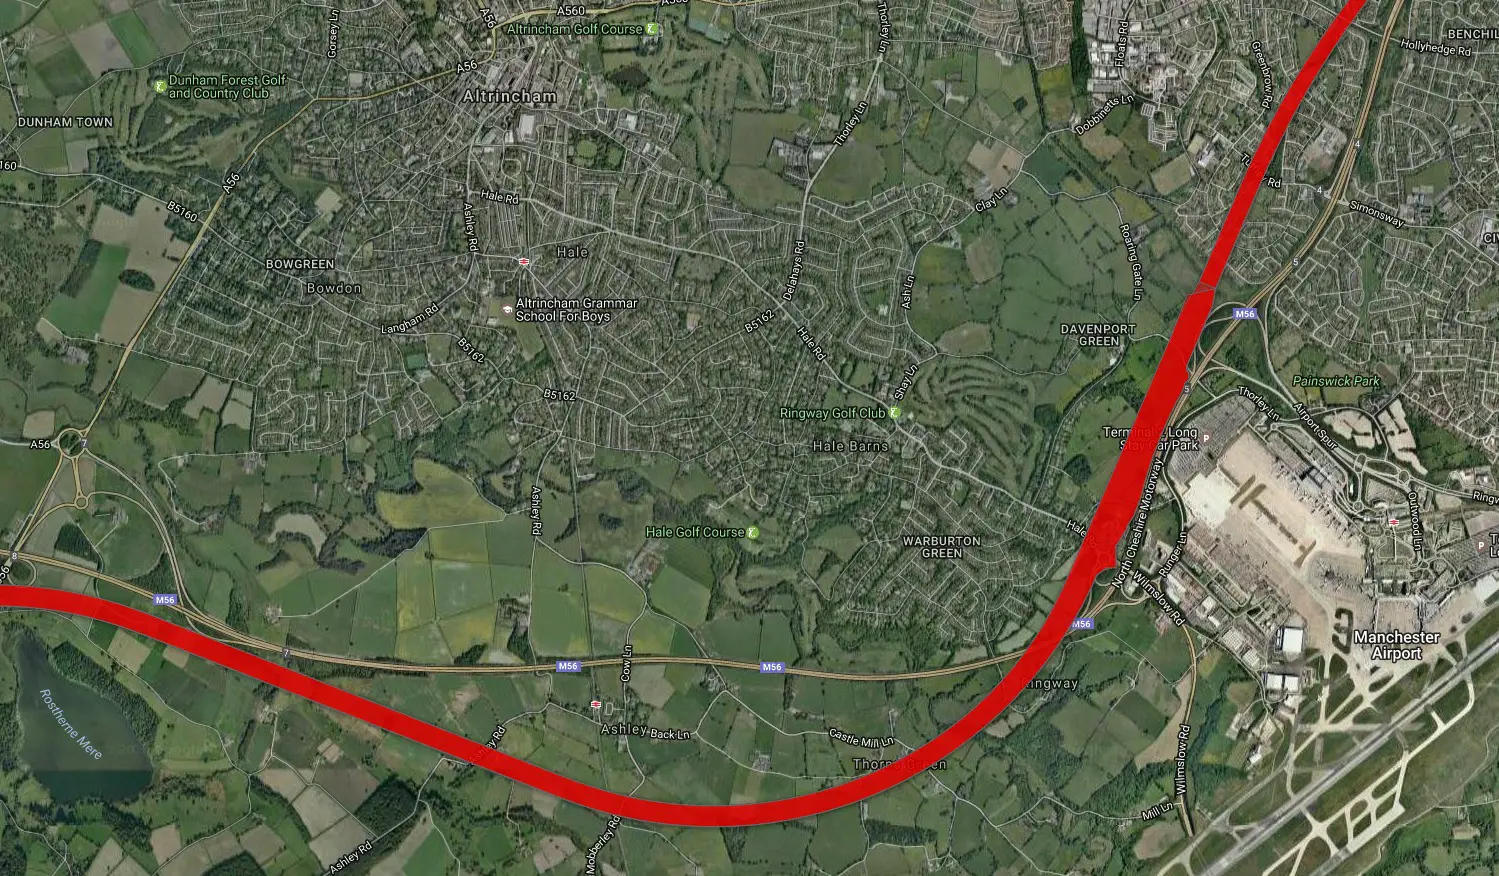 A map showing the proposed route of HS2 through the Altrincham area